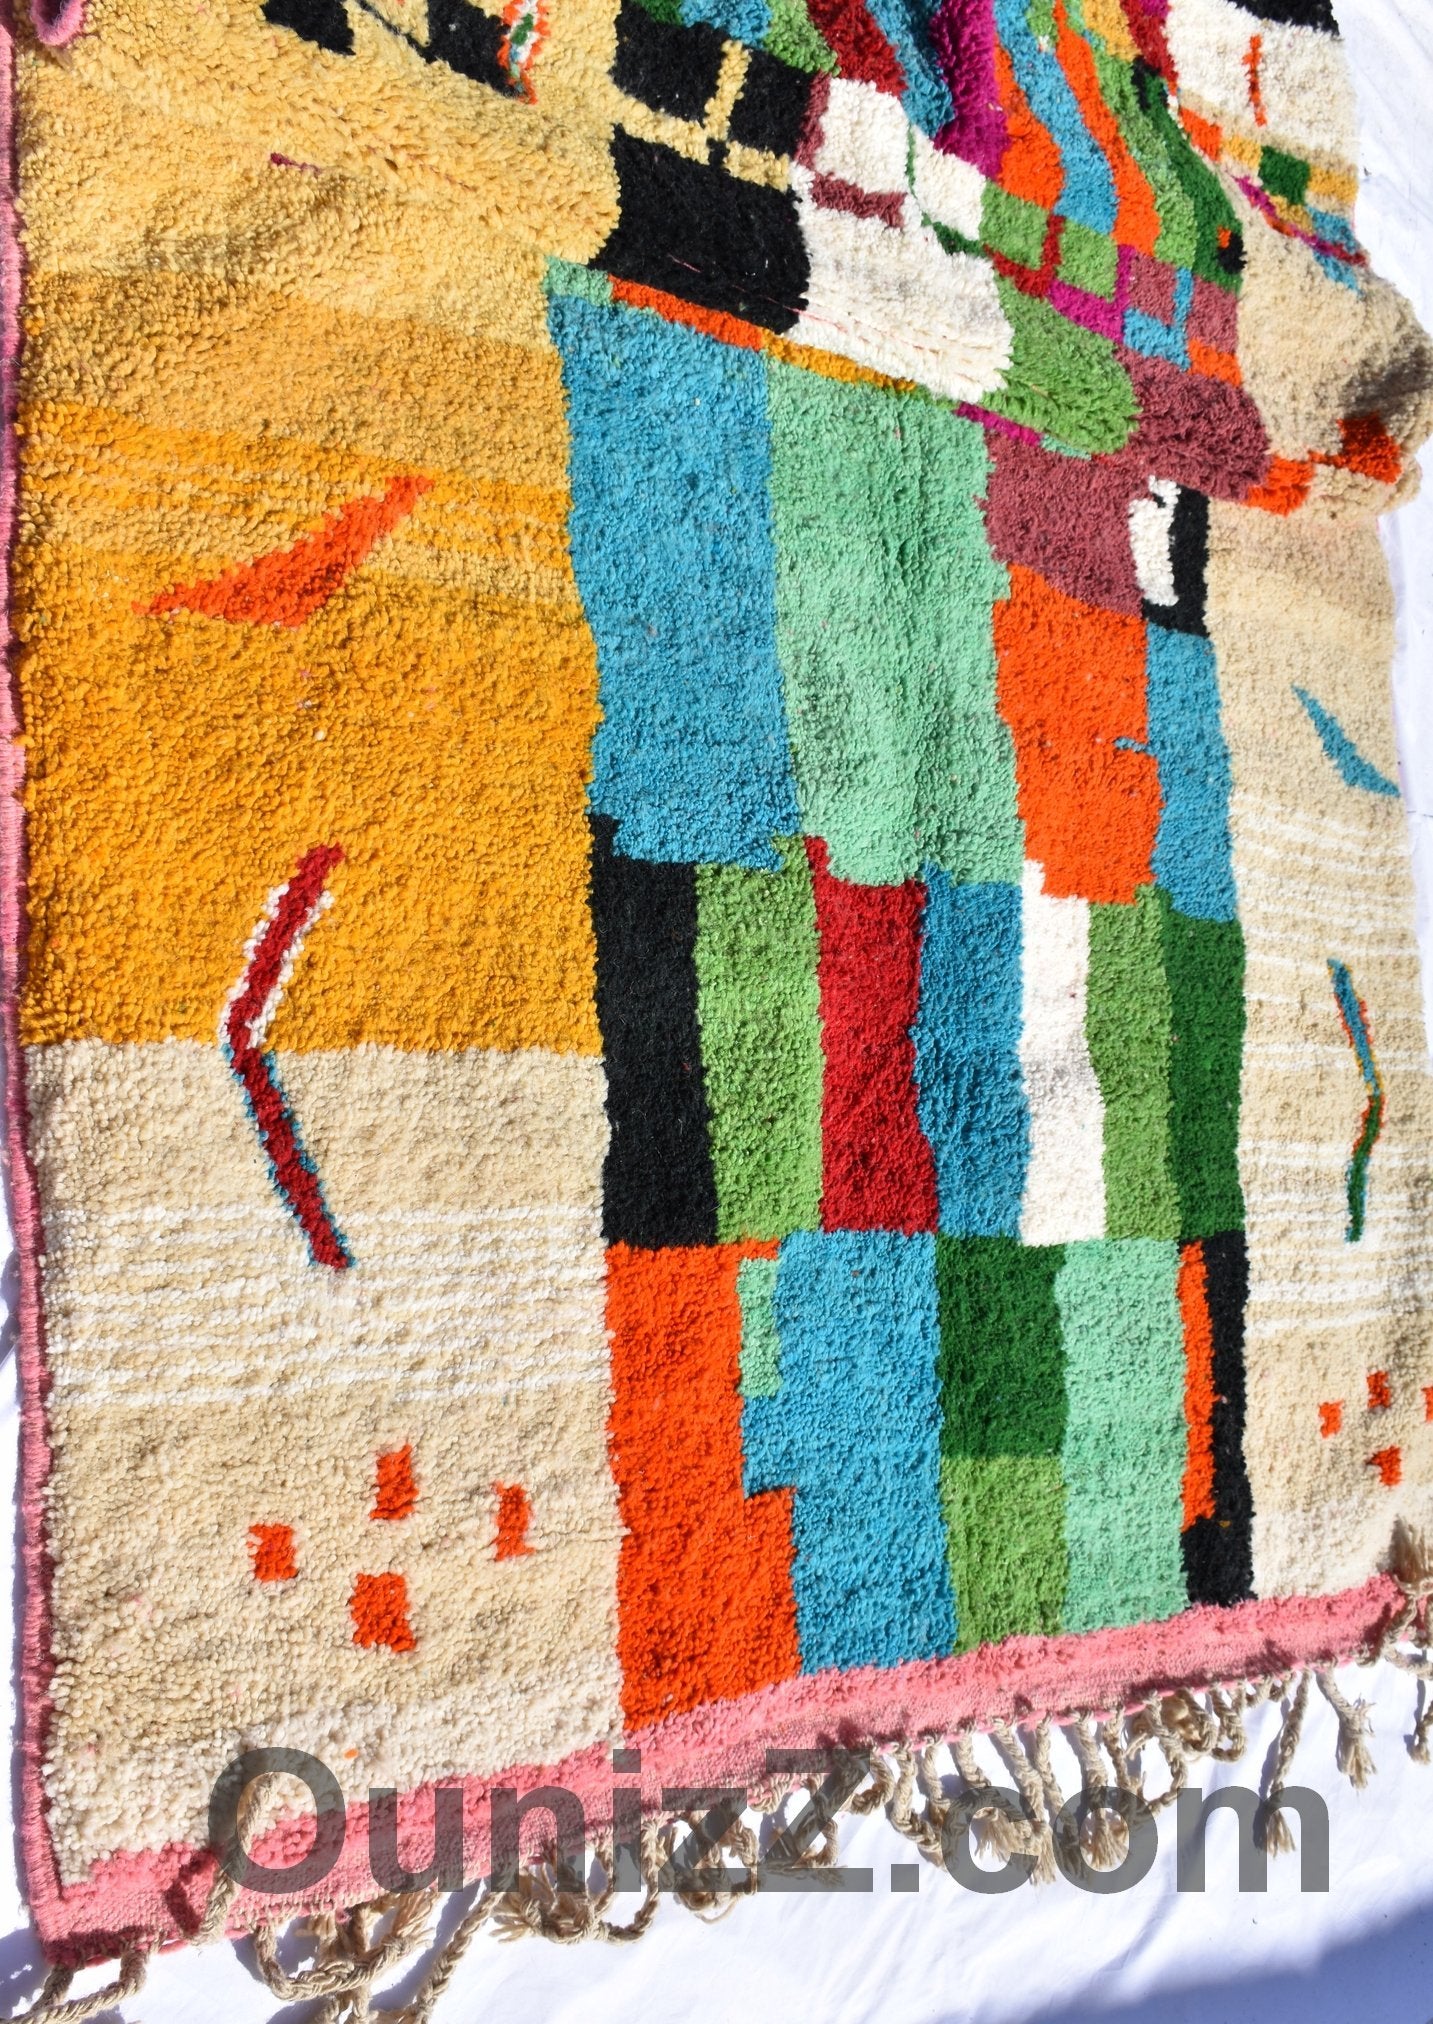 SOPHINIA | 8'2x5'35 Ft | 250x163 cm | Moroccan Colorful Rug | 100% wool handmade - OunizZ